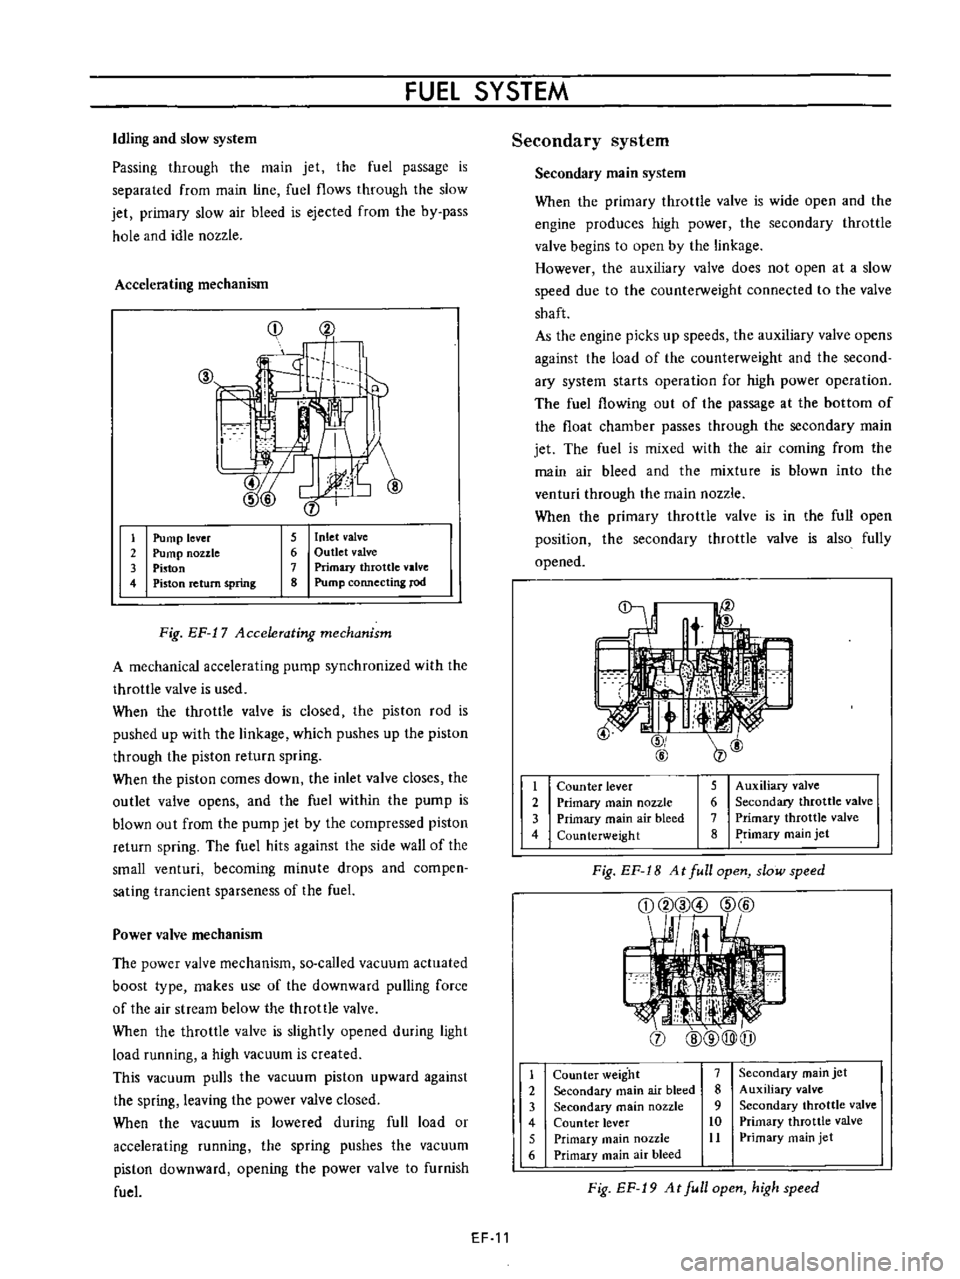 DATSUN B110 1973  Service Repair Manual 
FUEl

SYSTEM

Idling 
and 
slow

system

Passing 
through 
the 
main

jet 
the 
fuel

passage 
is

separated 
from 
main

line 
fuel 
flows

through 
the

slow

jet 
primary 
slow 
air 
bleed 
is

ej